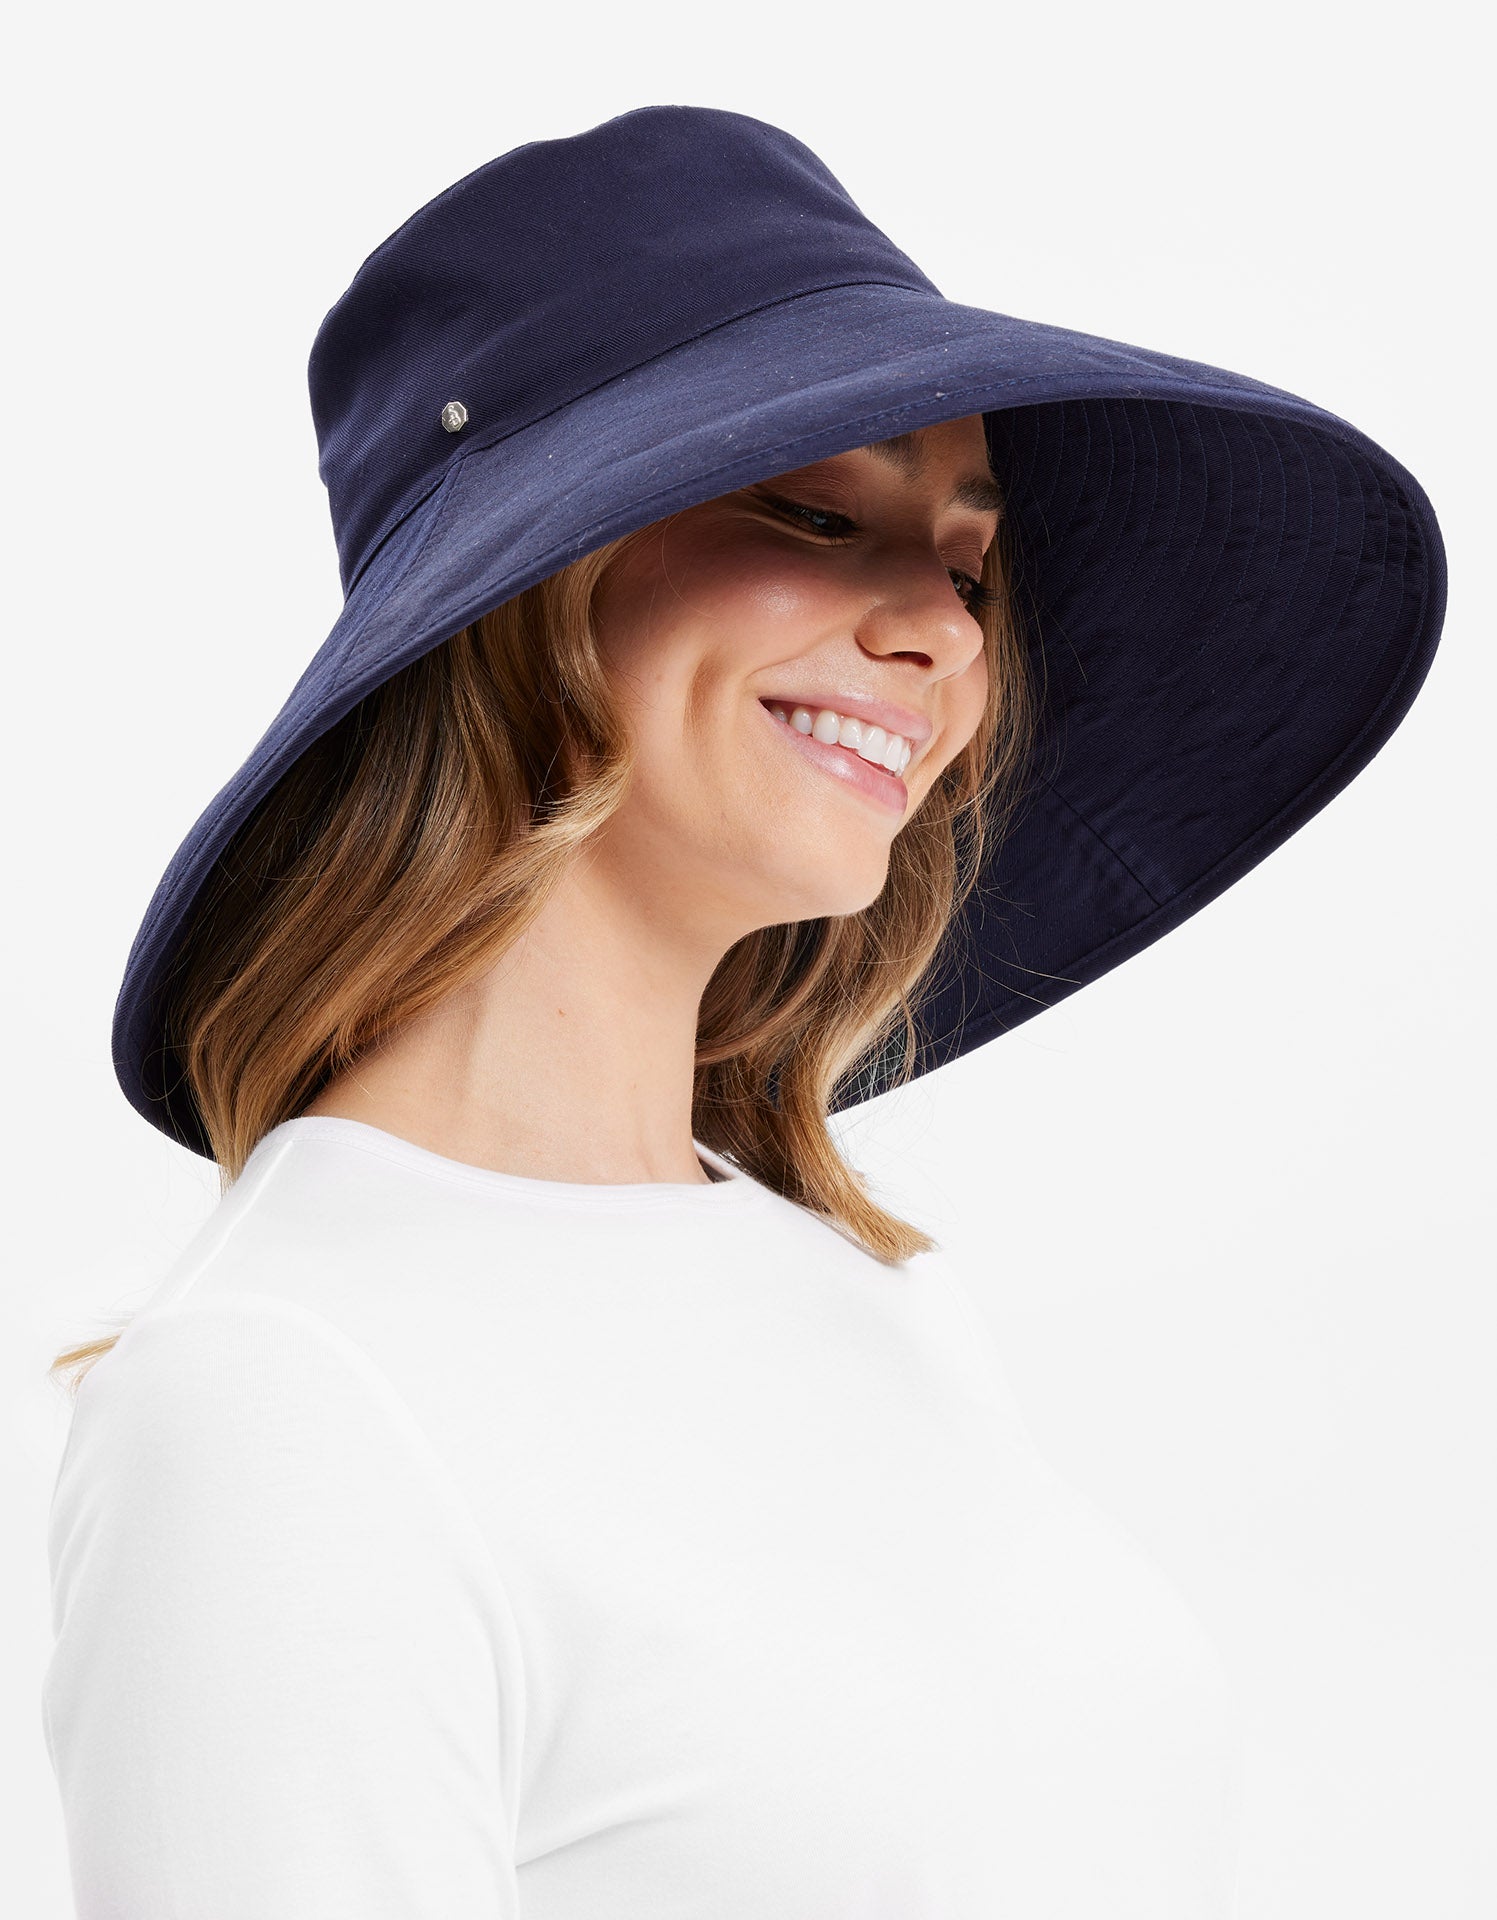 Wide brim sun hat or sunscreen: Which is better for sun protection? –  Solbari Australia